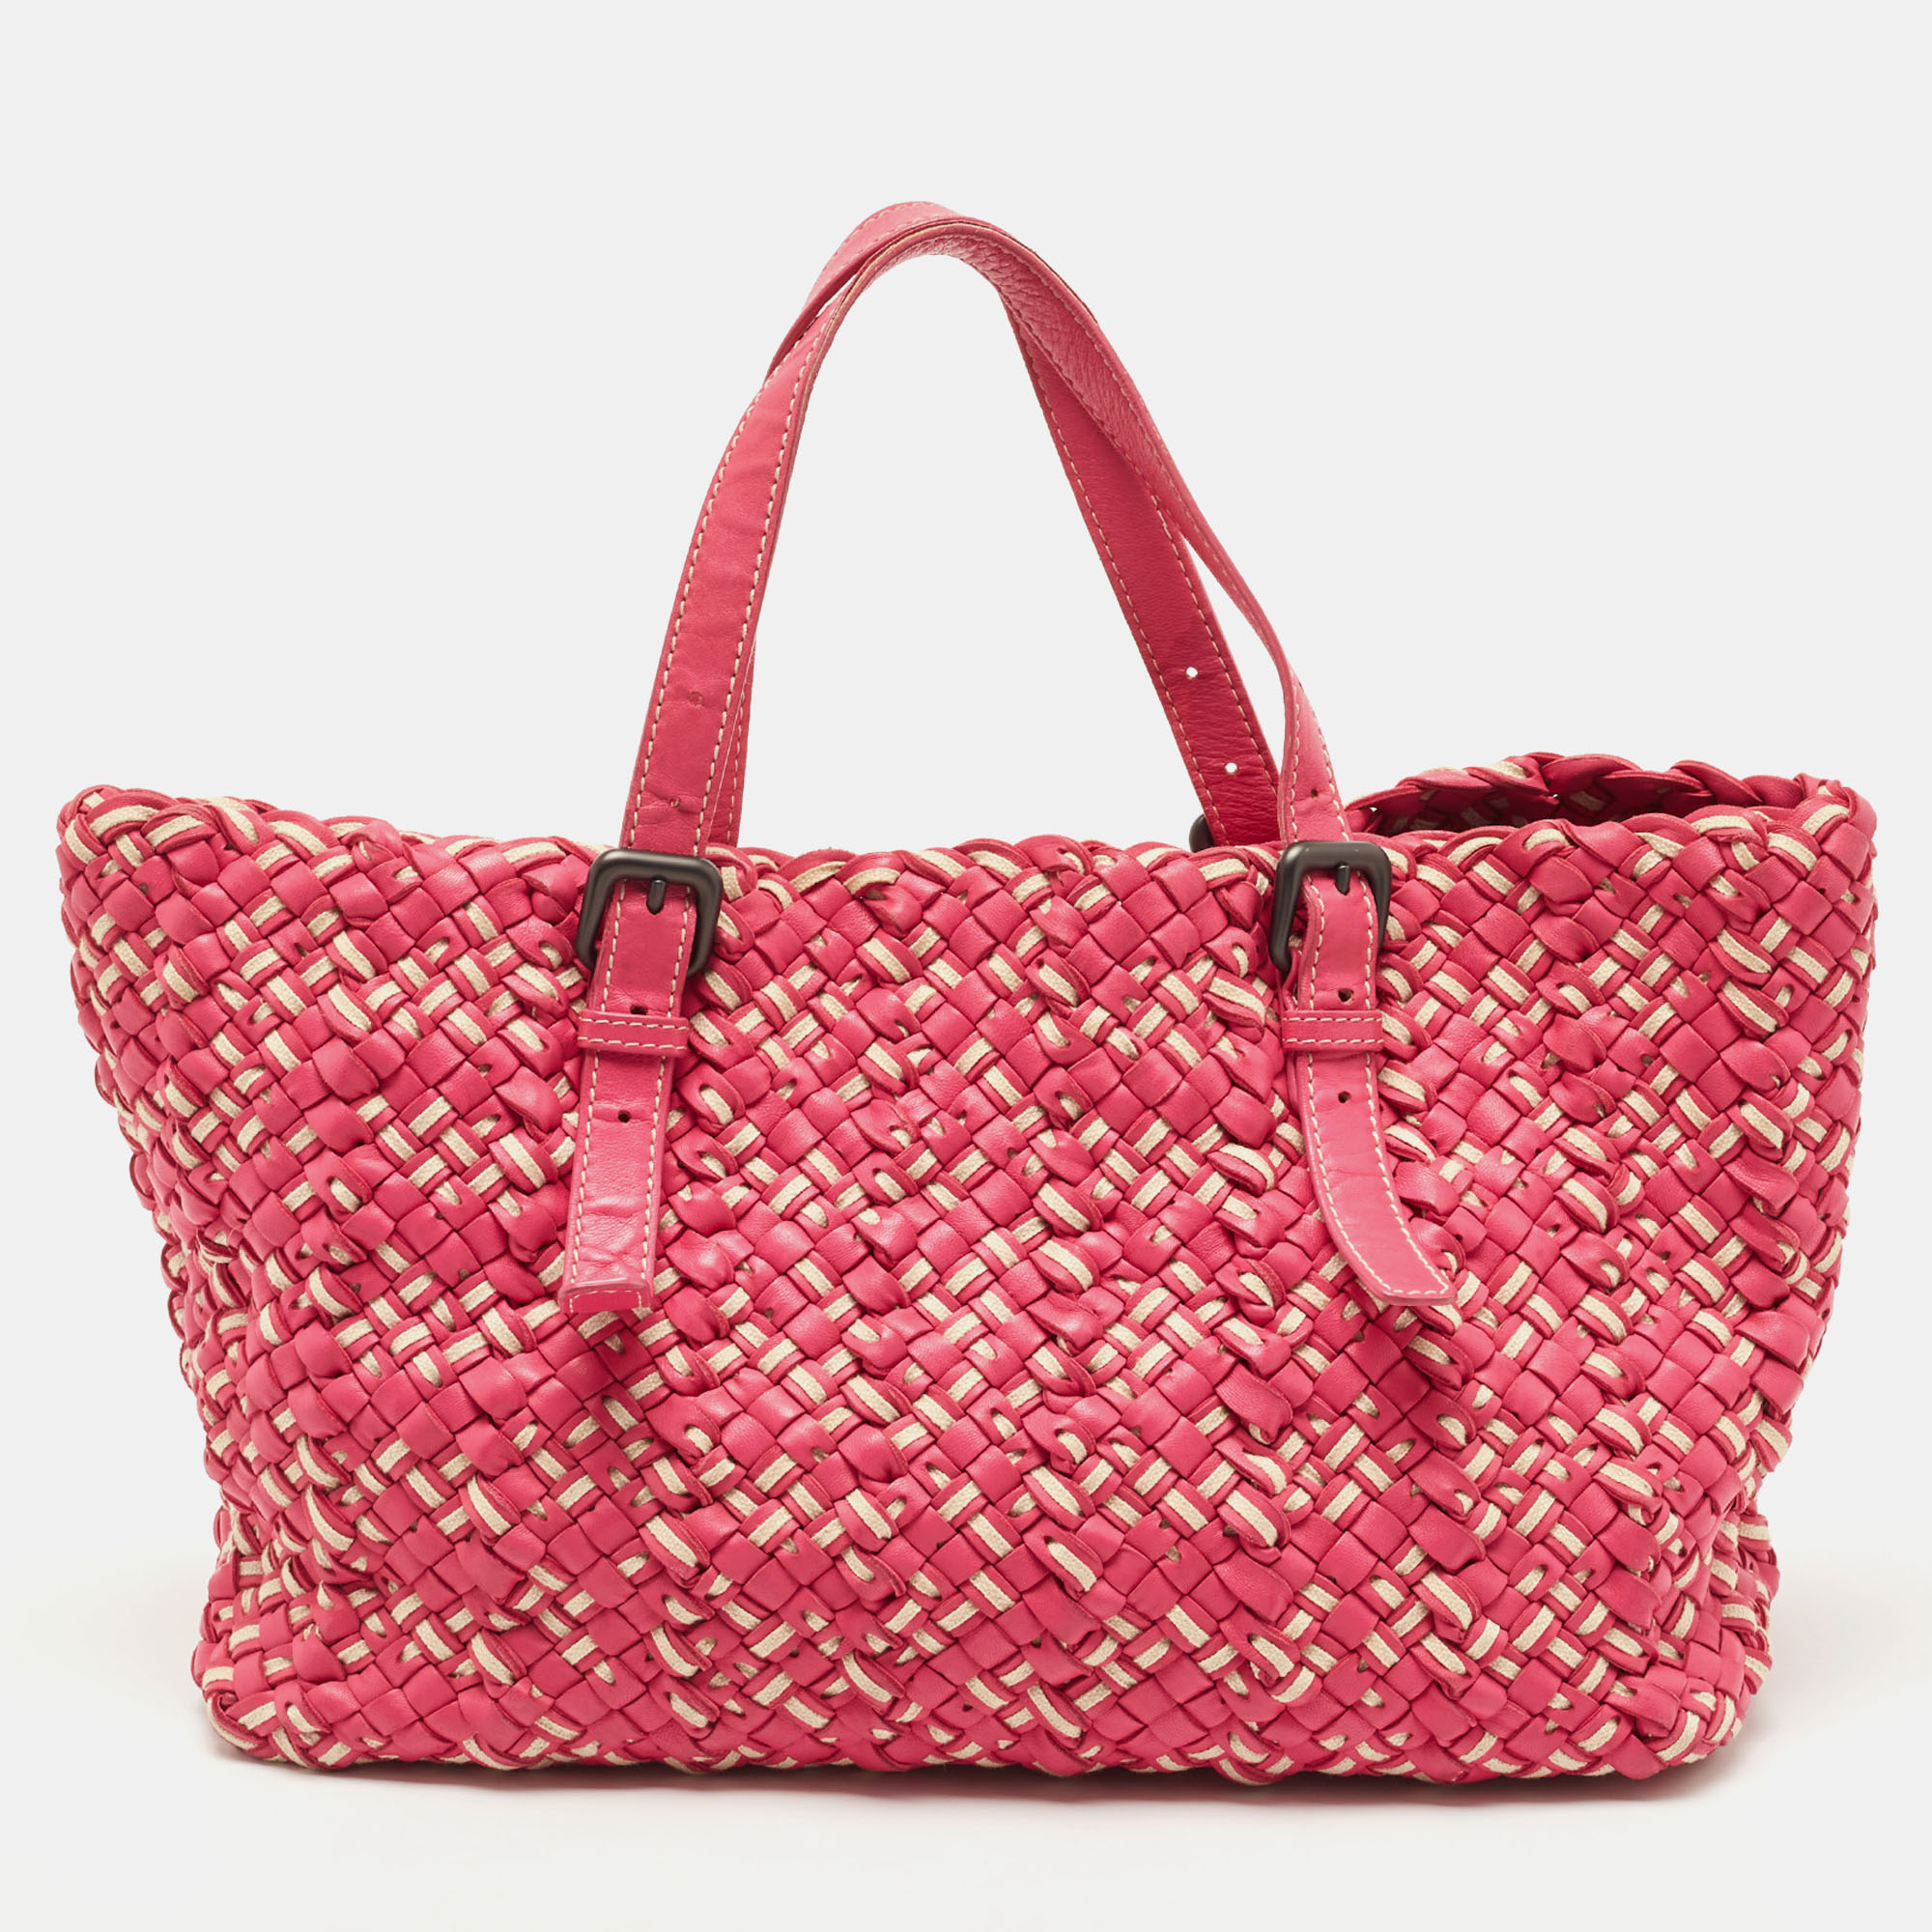 Let your style speak about your choices as you carry this Bottega Veneta Shopper tote. Crafted from the woven leather the exterior features an appealing shade of pink and beige. It is accented with two top handles. The interior is lined with leather for comfortable storage.